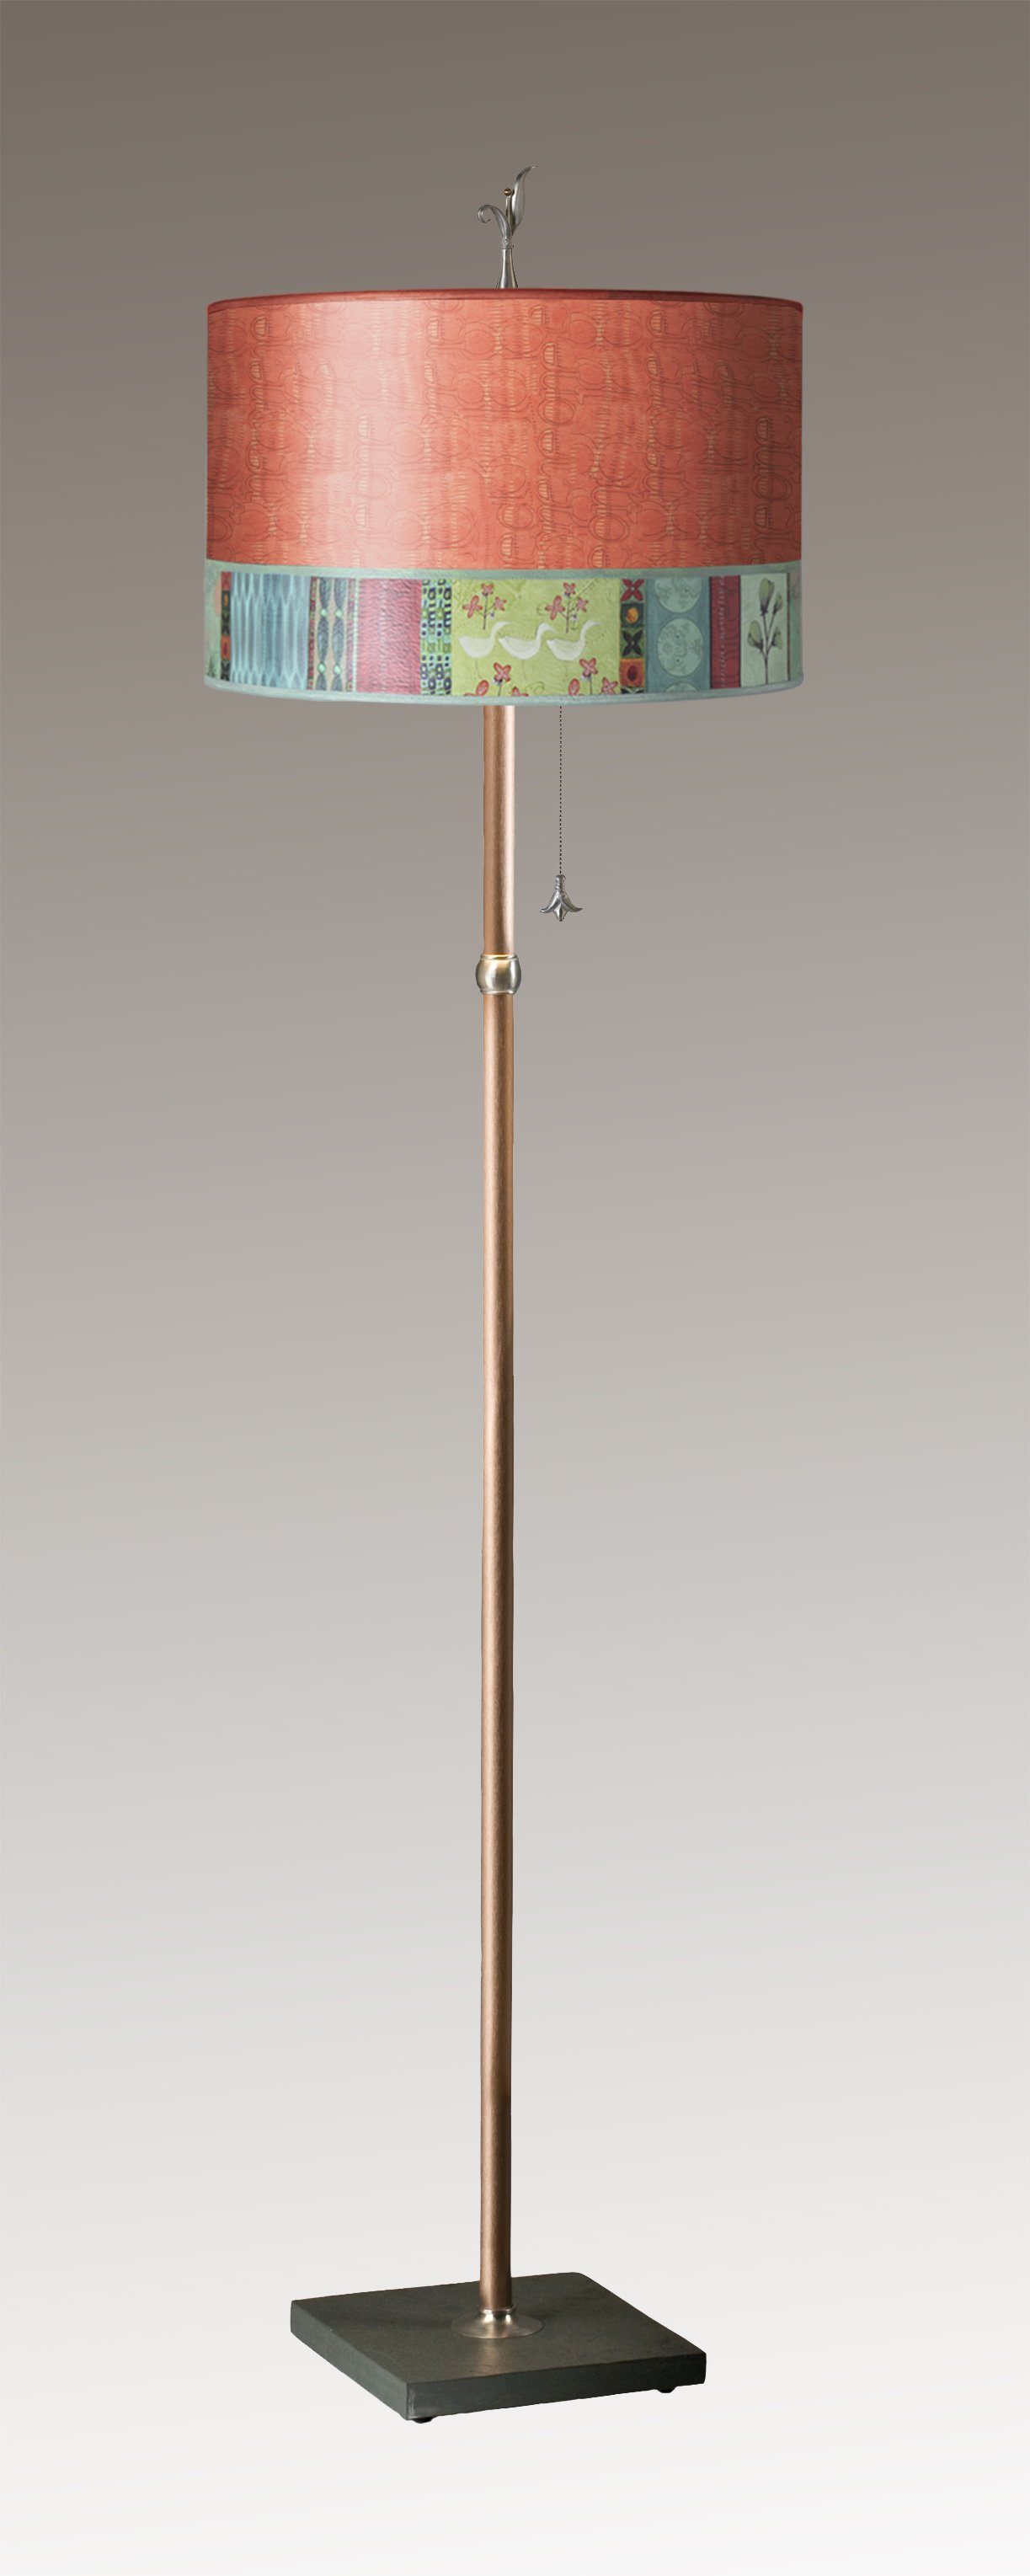 Janna Ugone & Co Floor Lamps Copper Floor Lamp with Large Drum Lampshade in Melody in Coral